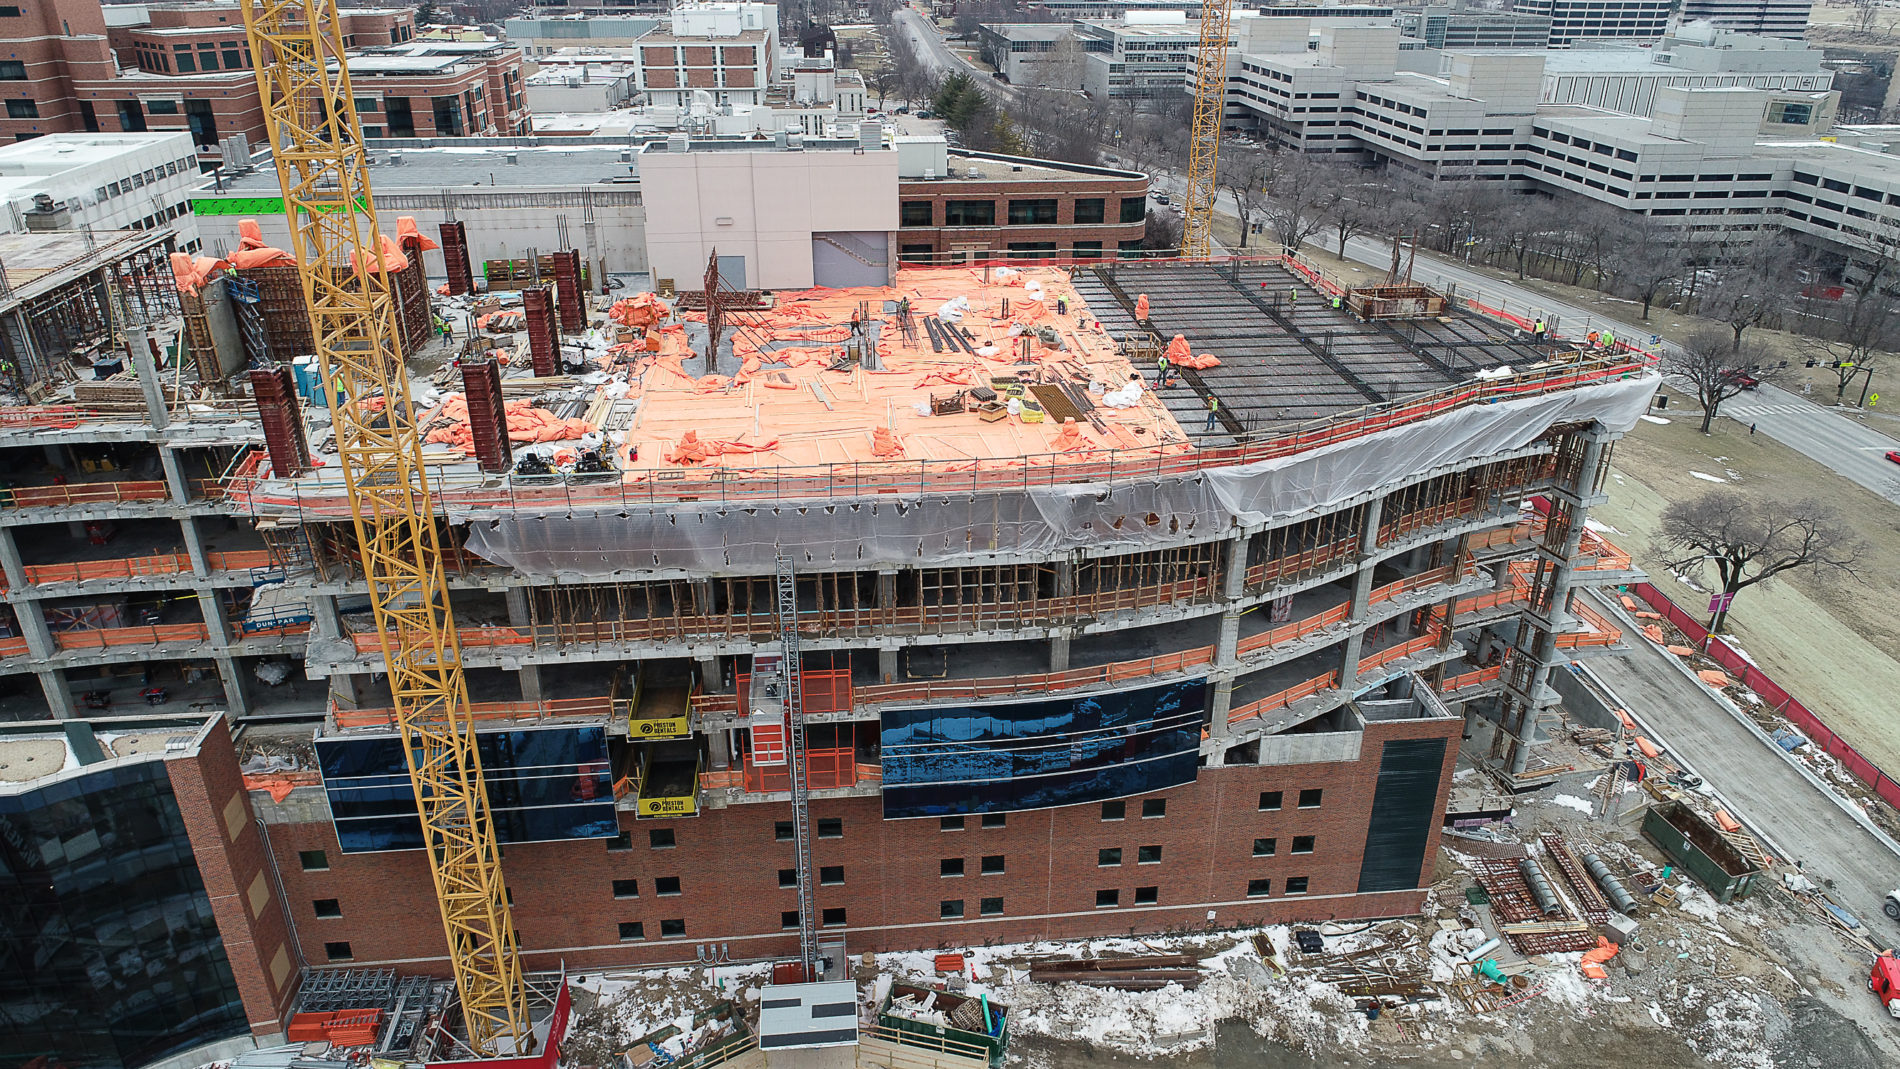 McCownGordon's Project, Children's Mercy Research Institute Under Construction